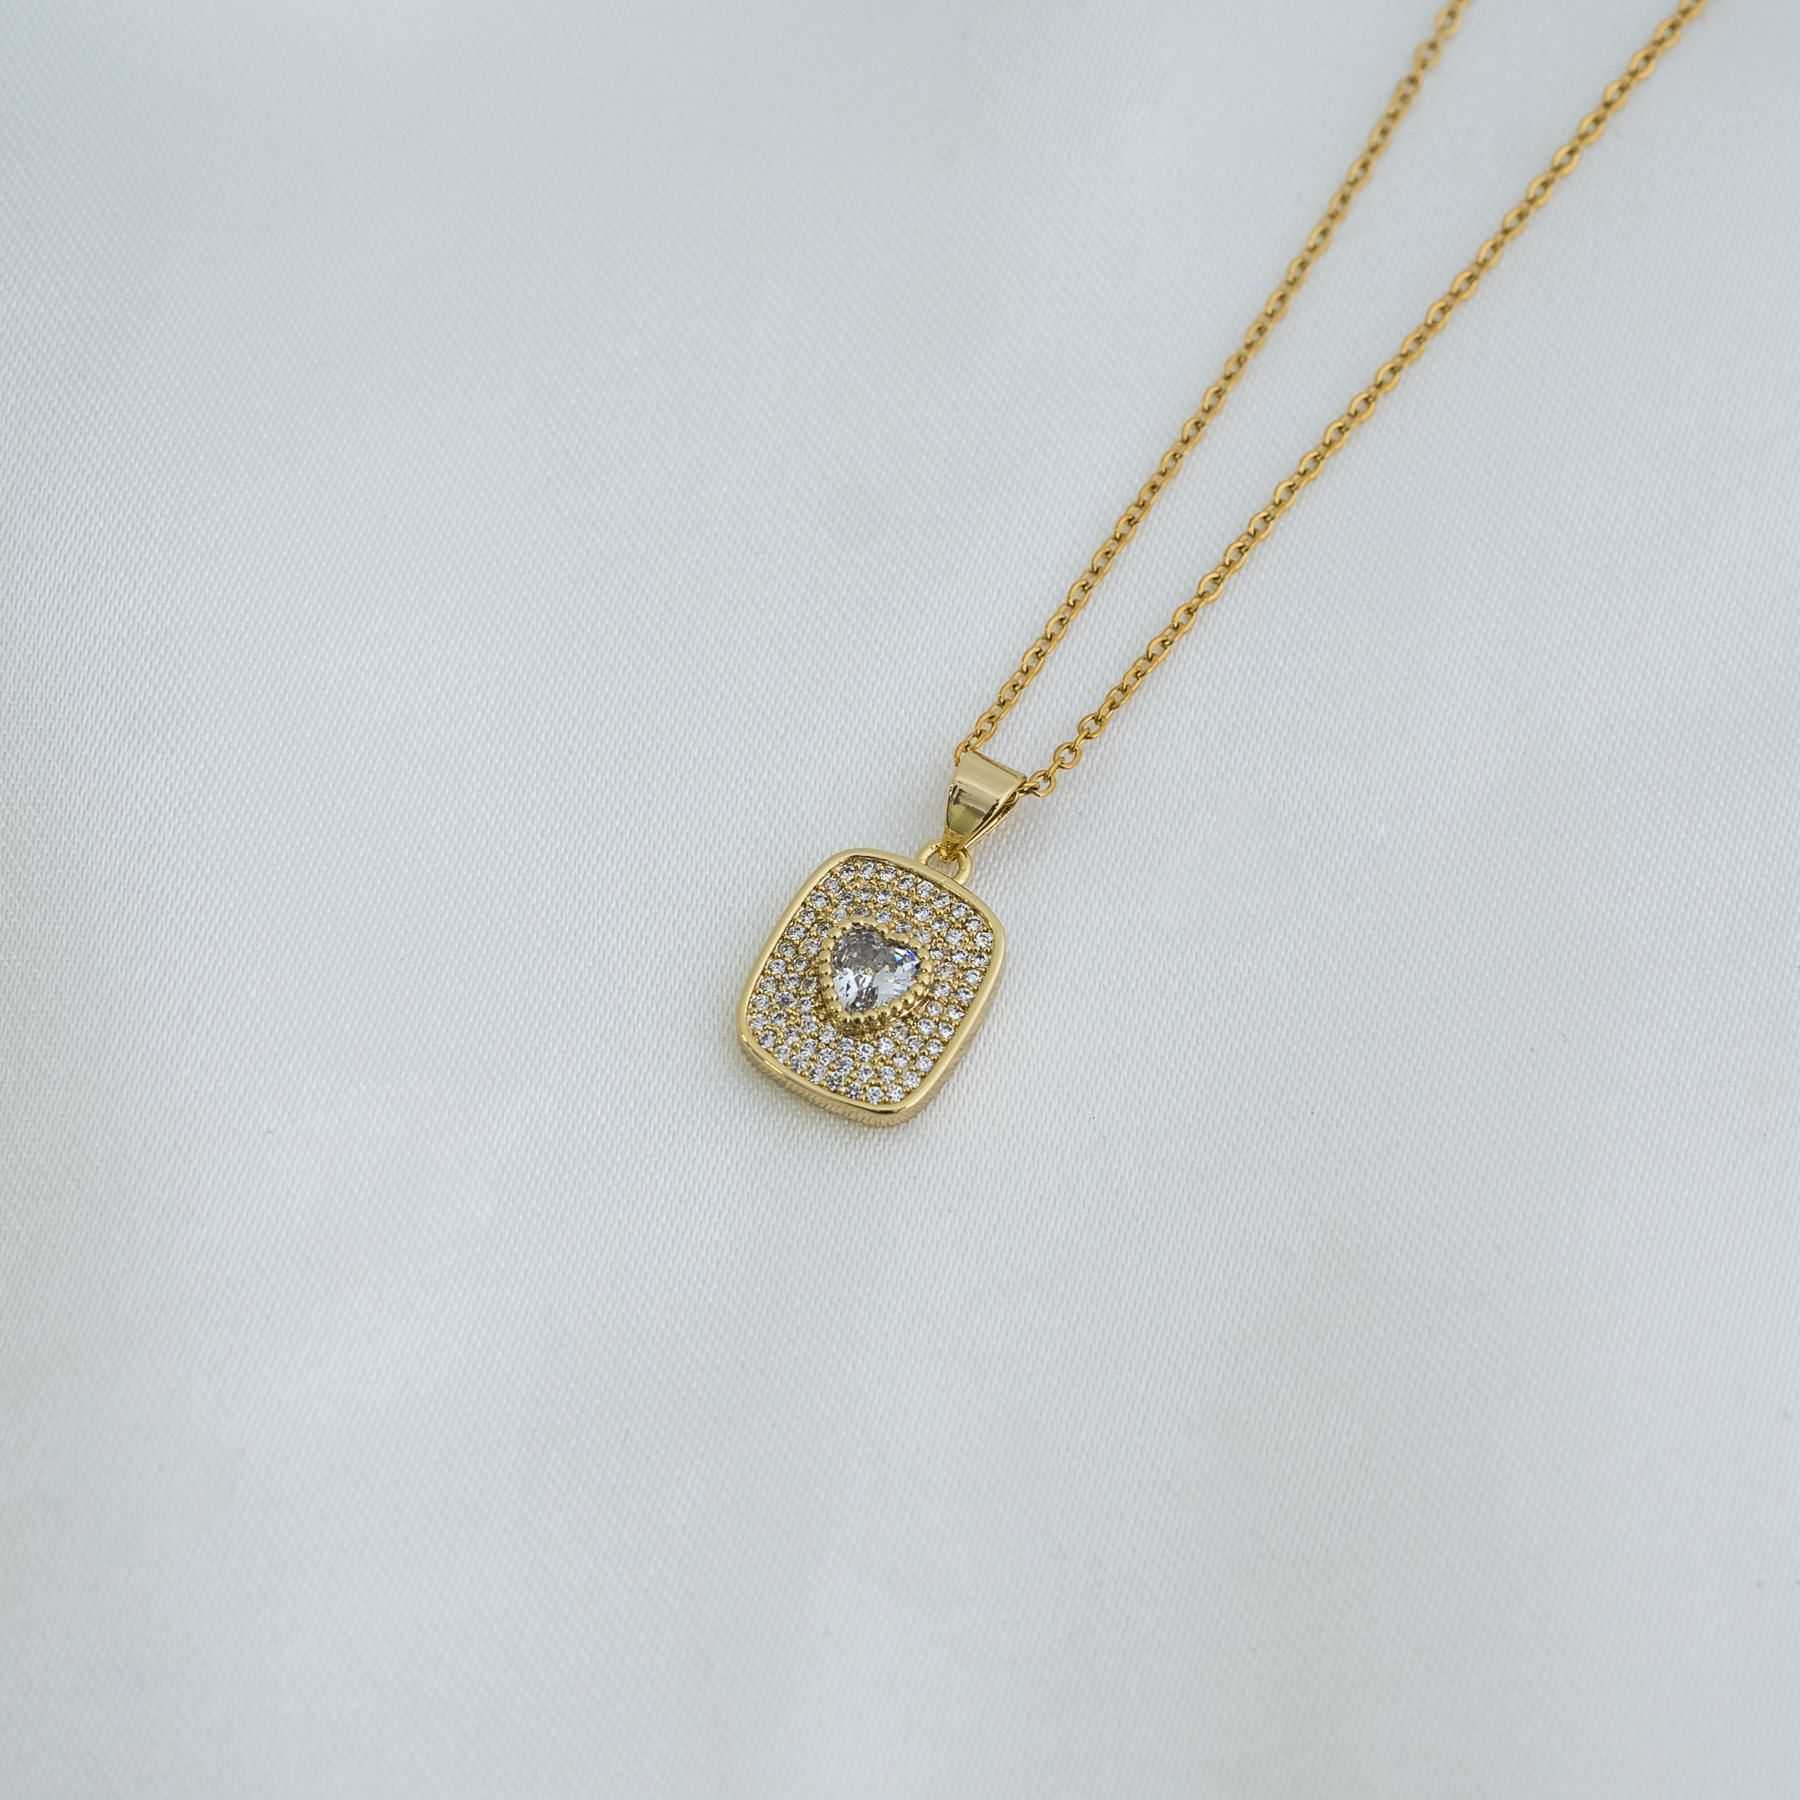 I LOVE YOU NECKLACE - GOLD & WHITE